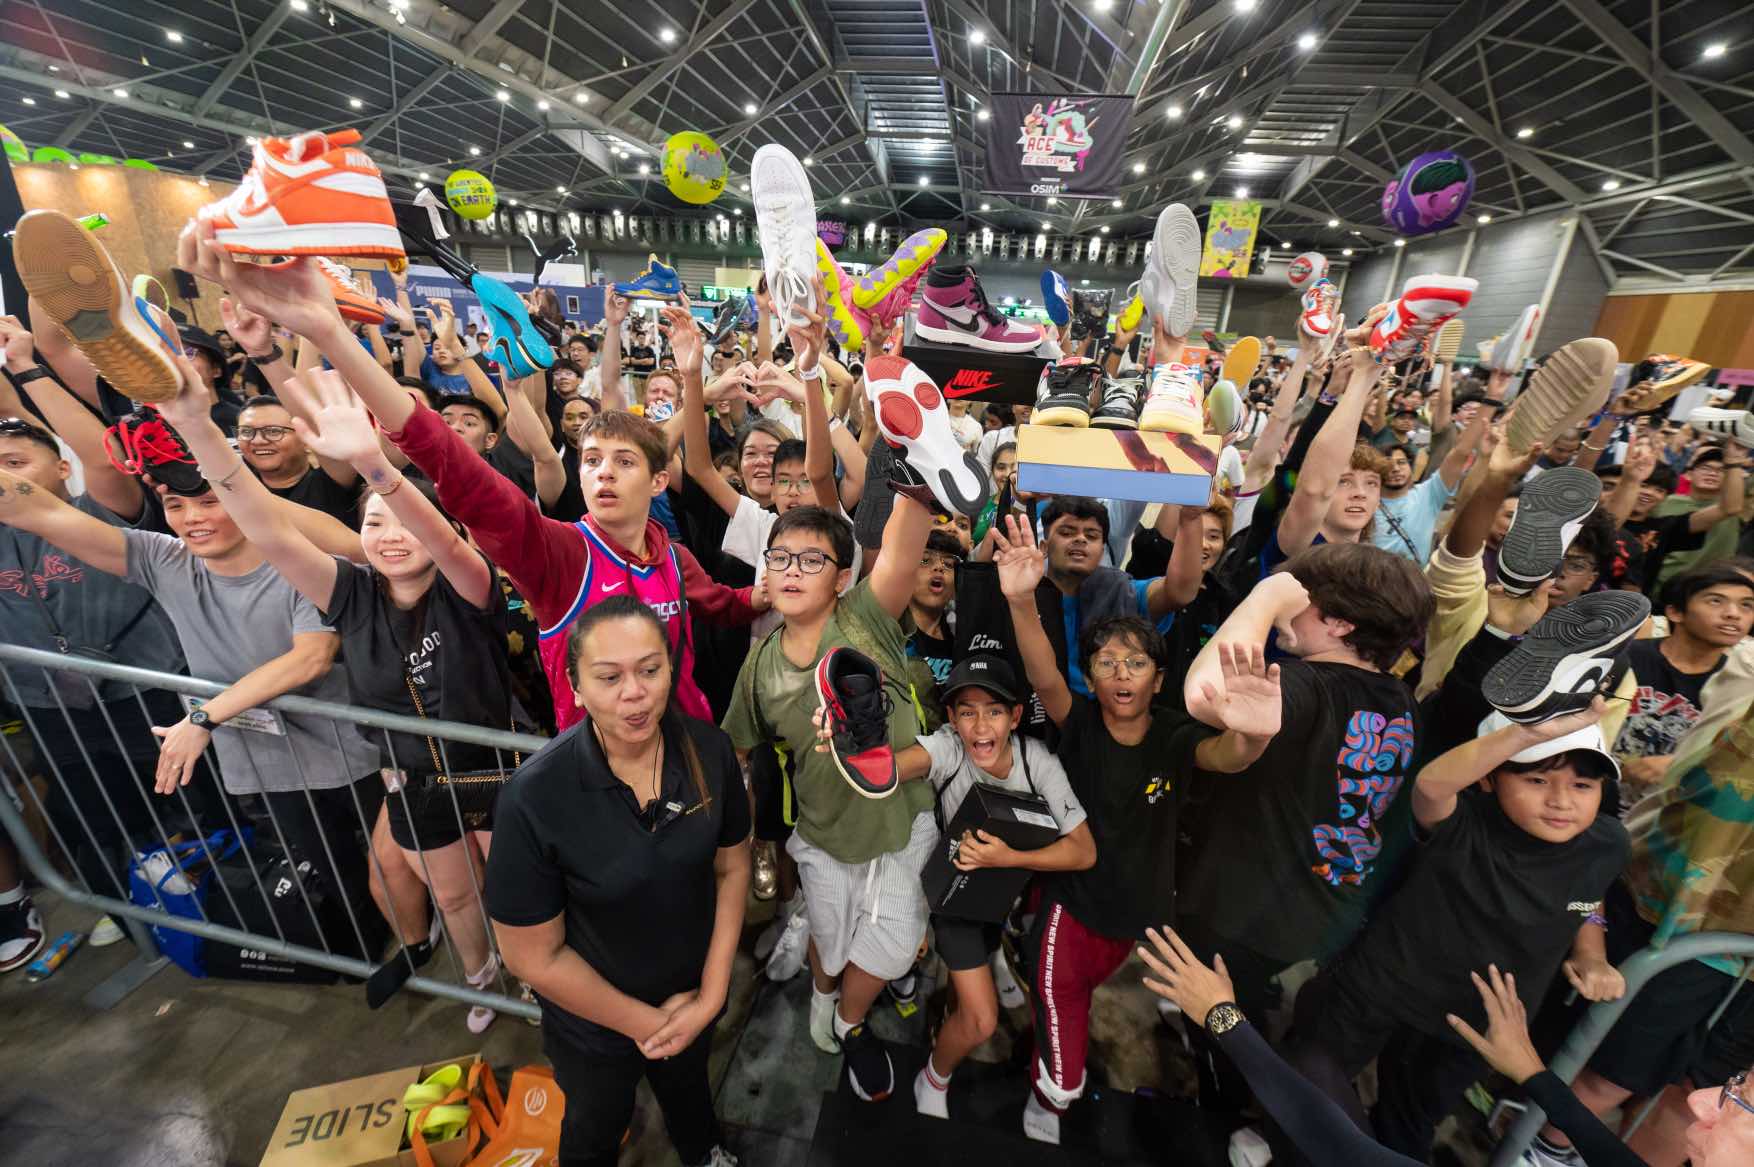 , More pumped-up kicks at Sneaker Con Southeast Asia 2024